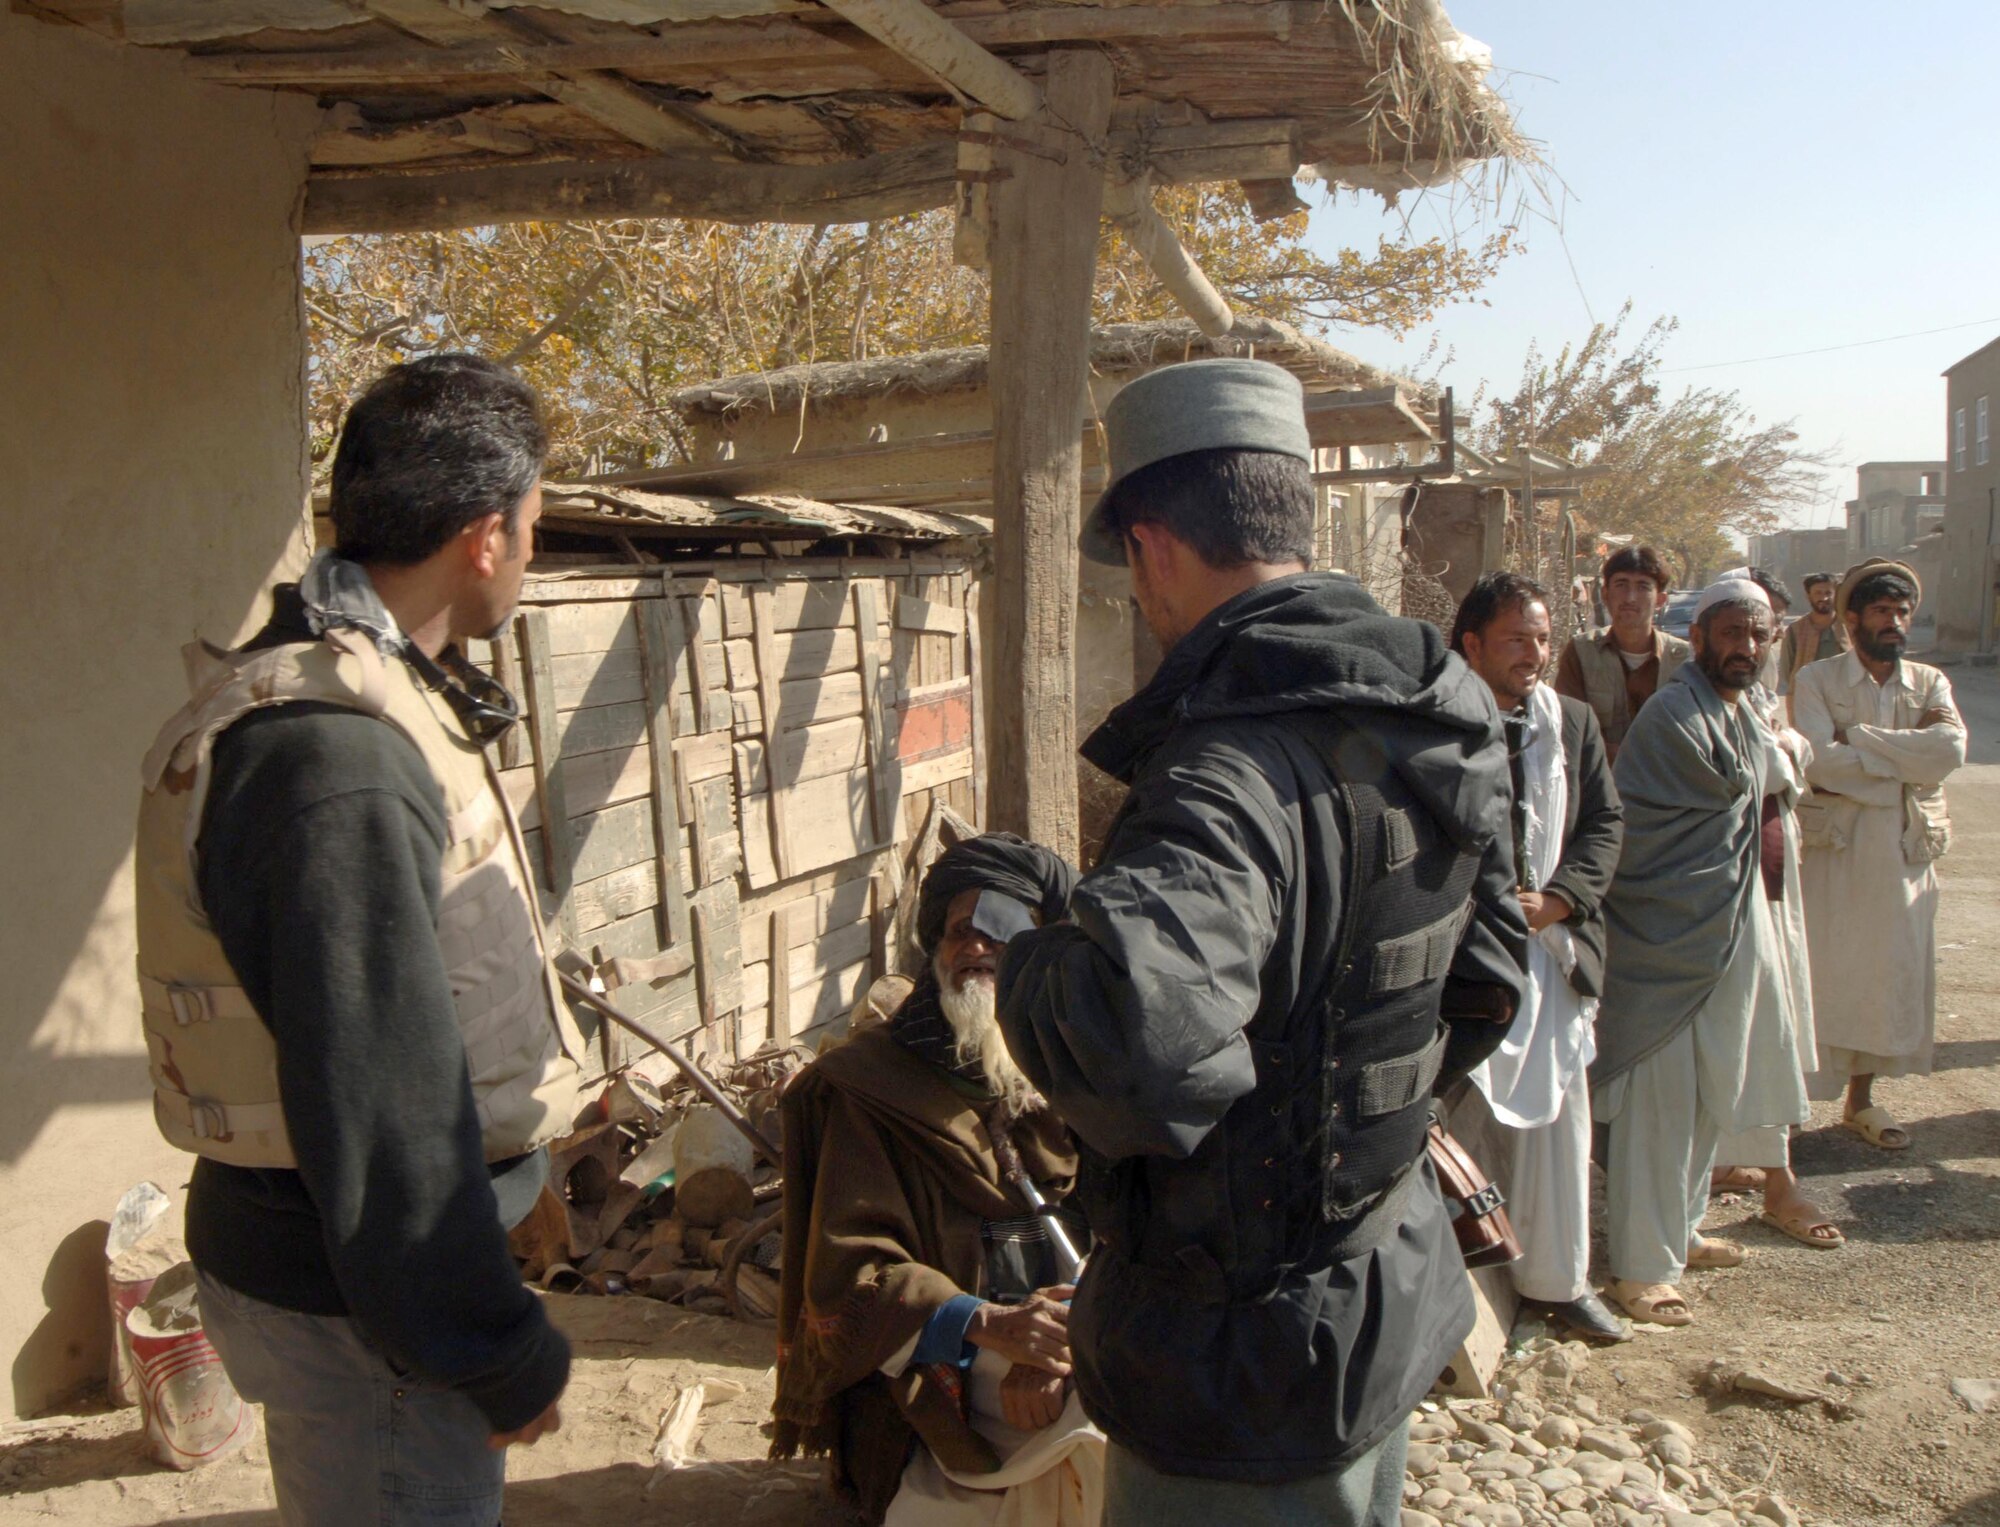 An Air Force Office of Special Investigations agent and an Afghan National Police officer speak with villagers during a medical engagement mission here. The ANP and Airmen often work together while providing assistance to local villages, reinforcing the commitment of U.S. forces to build a better Afghanistan. (U.S. Air Force photo by Staff Sgt. Mike Andriacco)